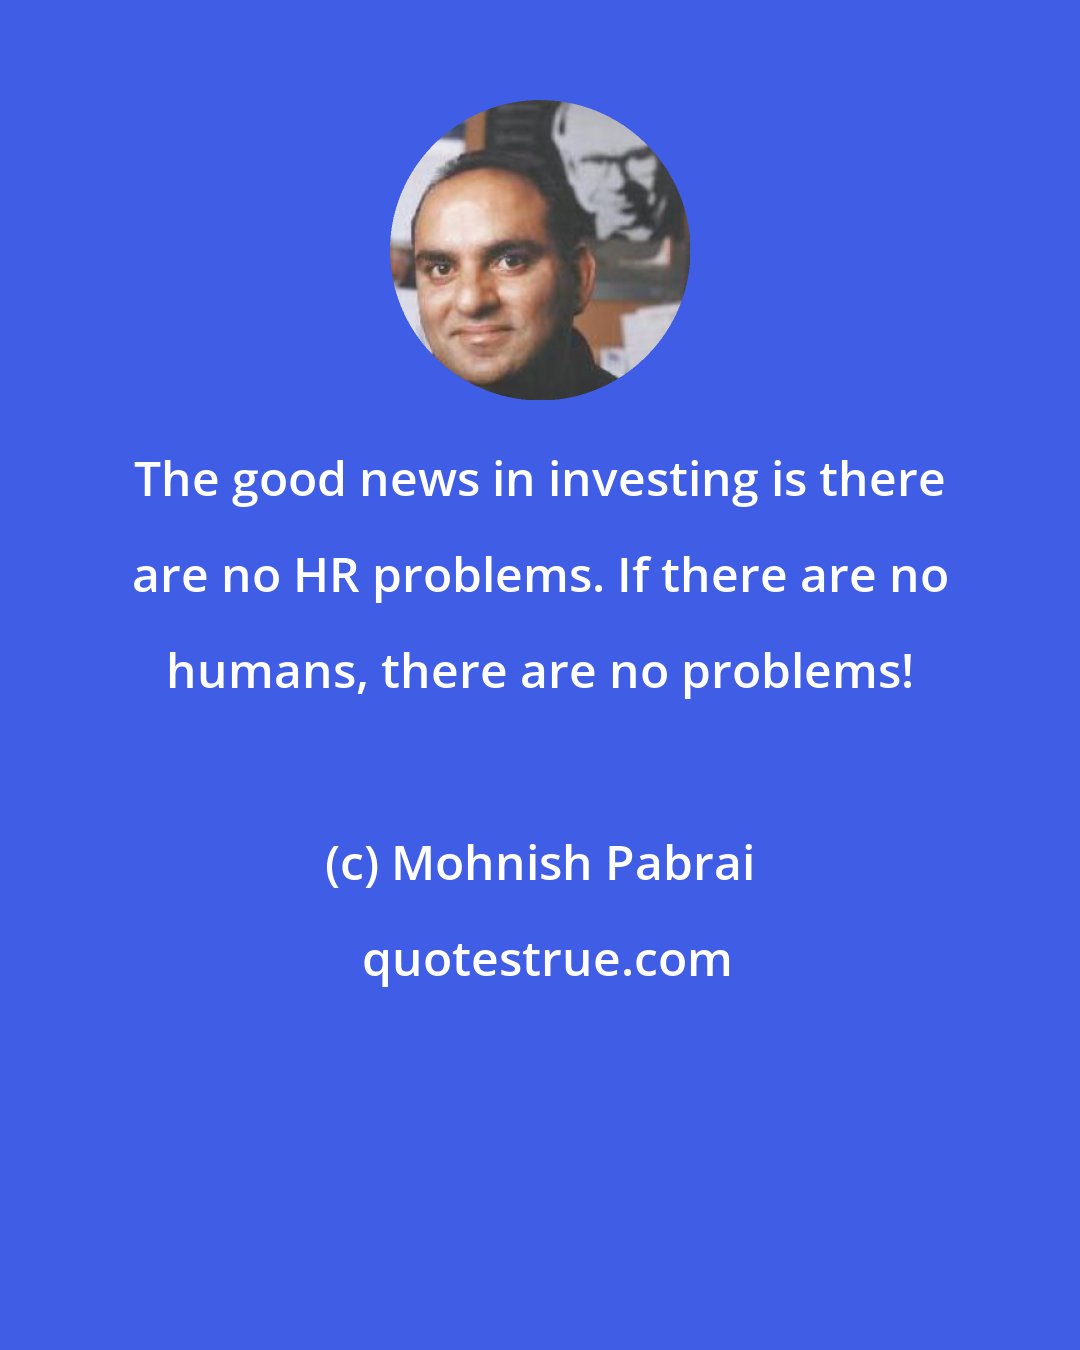 Mohnish Pabrai: The good news in investing is there are no HR problems. If there are no humans, there are no problems!